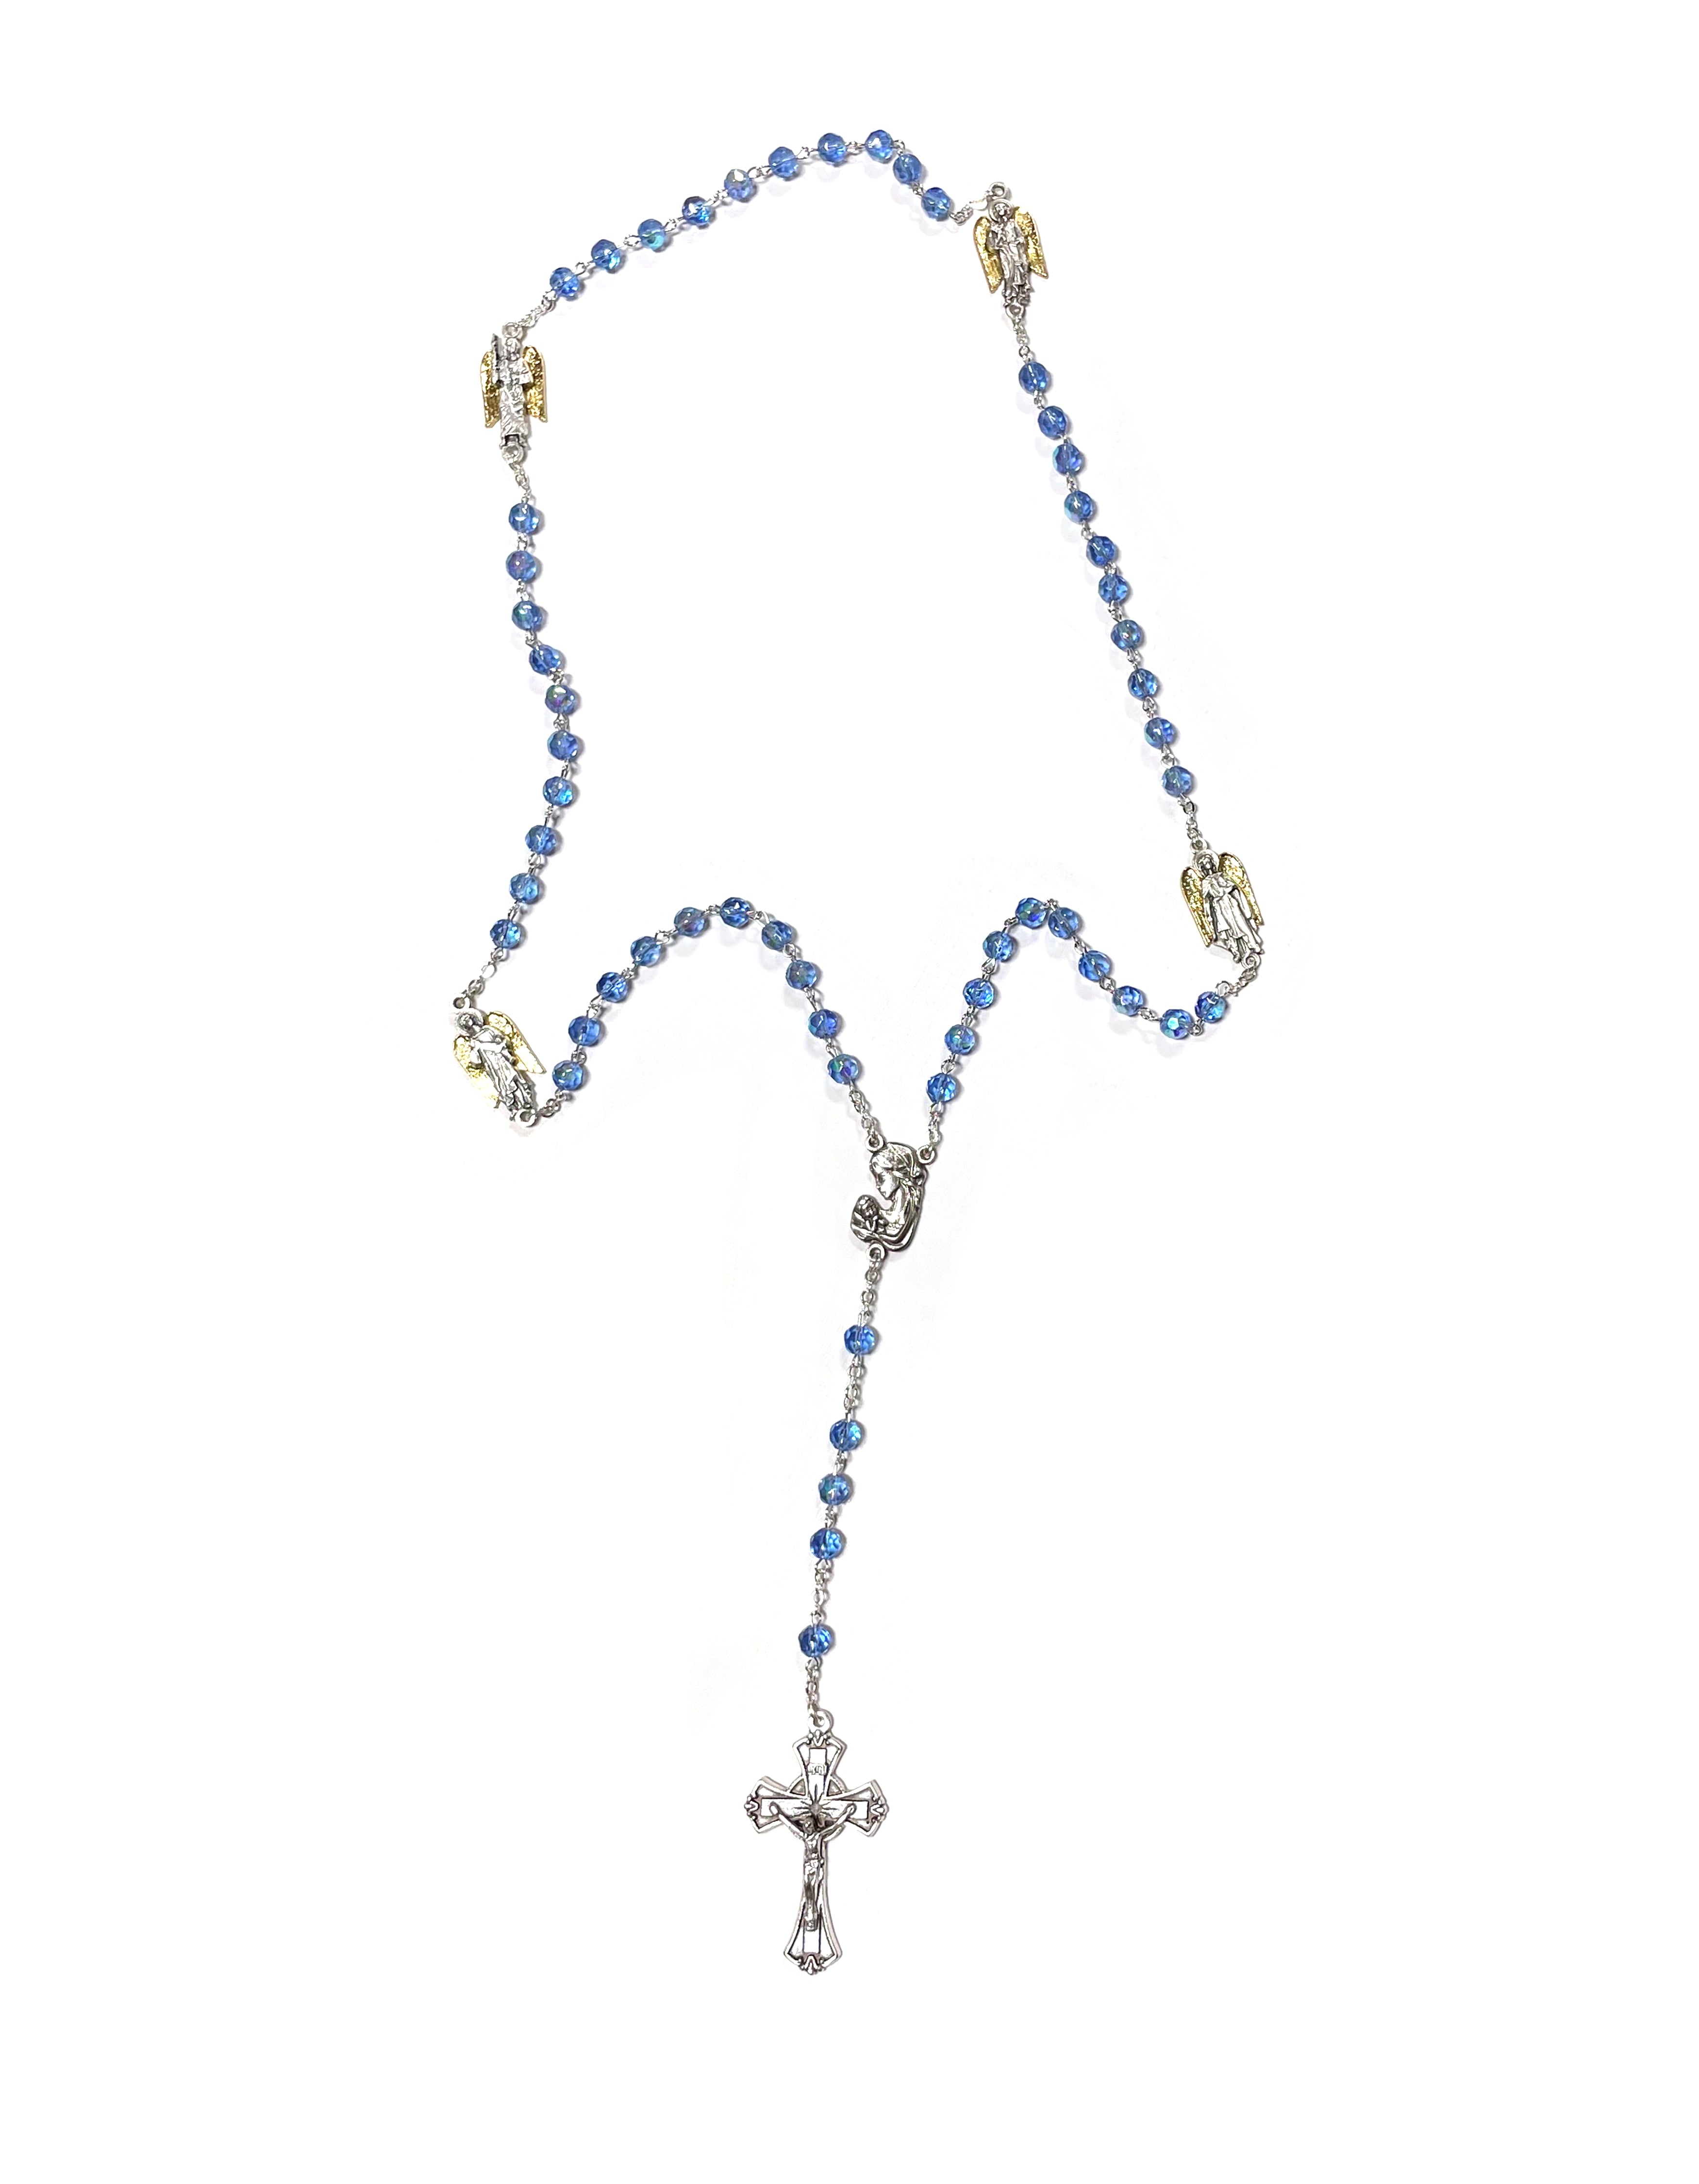 Blue crystal rosary with medals of the three Archangels and the Guardian Angel